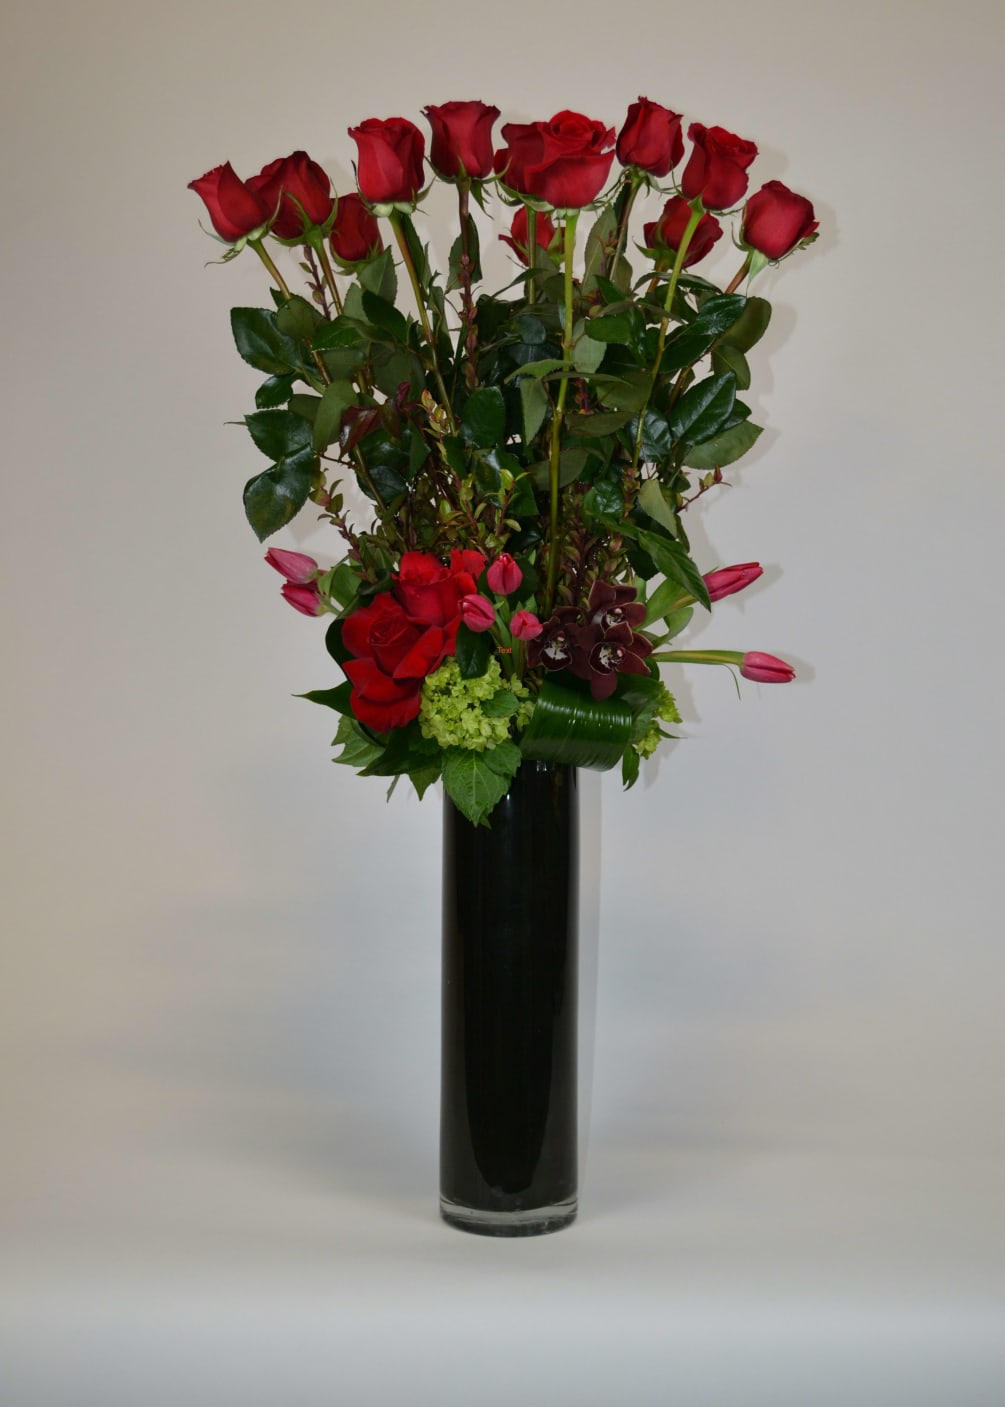 Long stem Red Roses and Red Tulips with a few Cymbidium Orchids